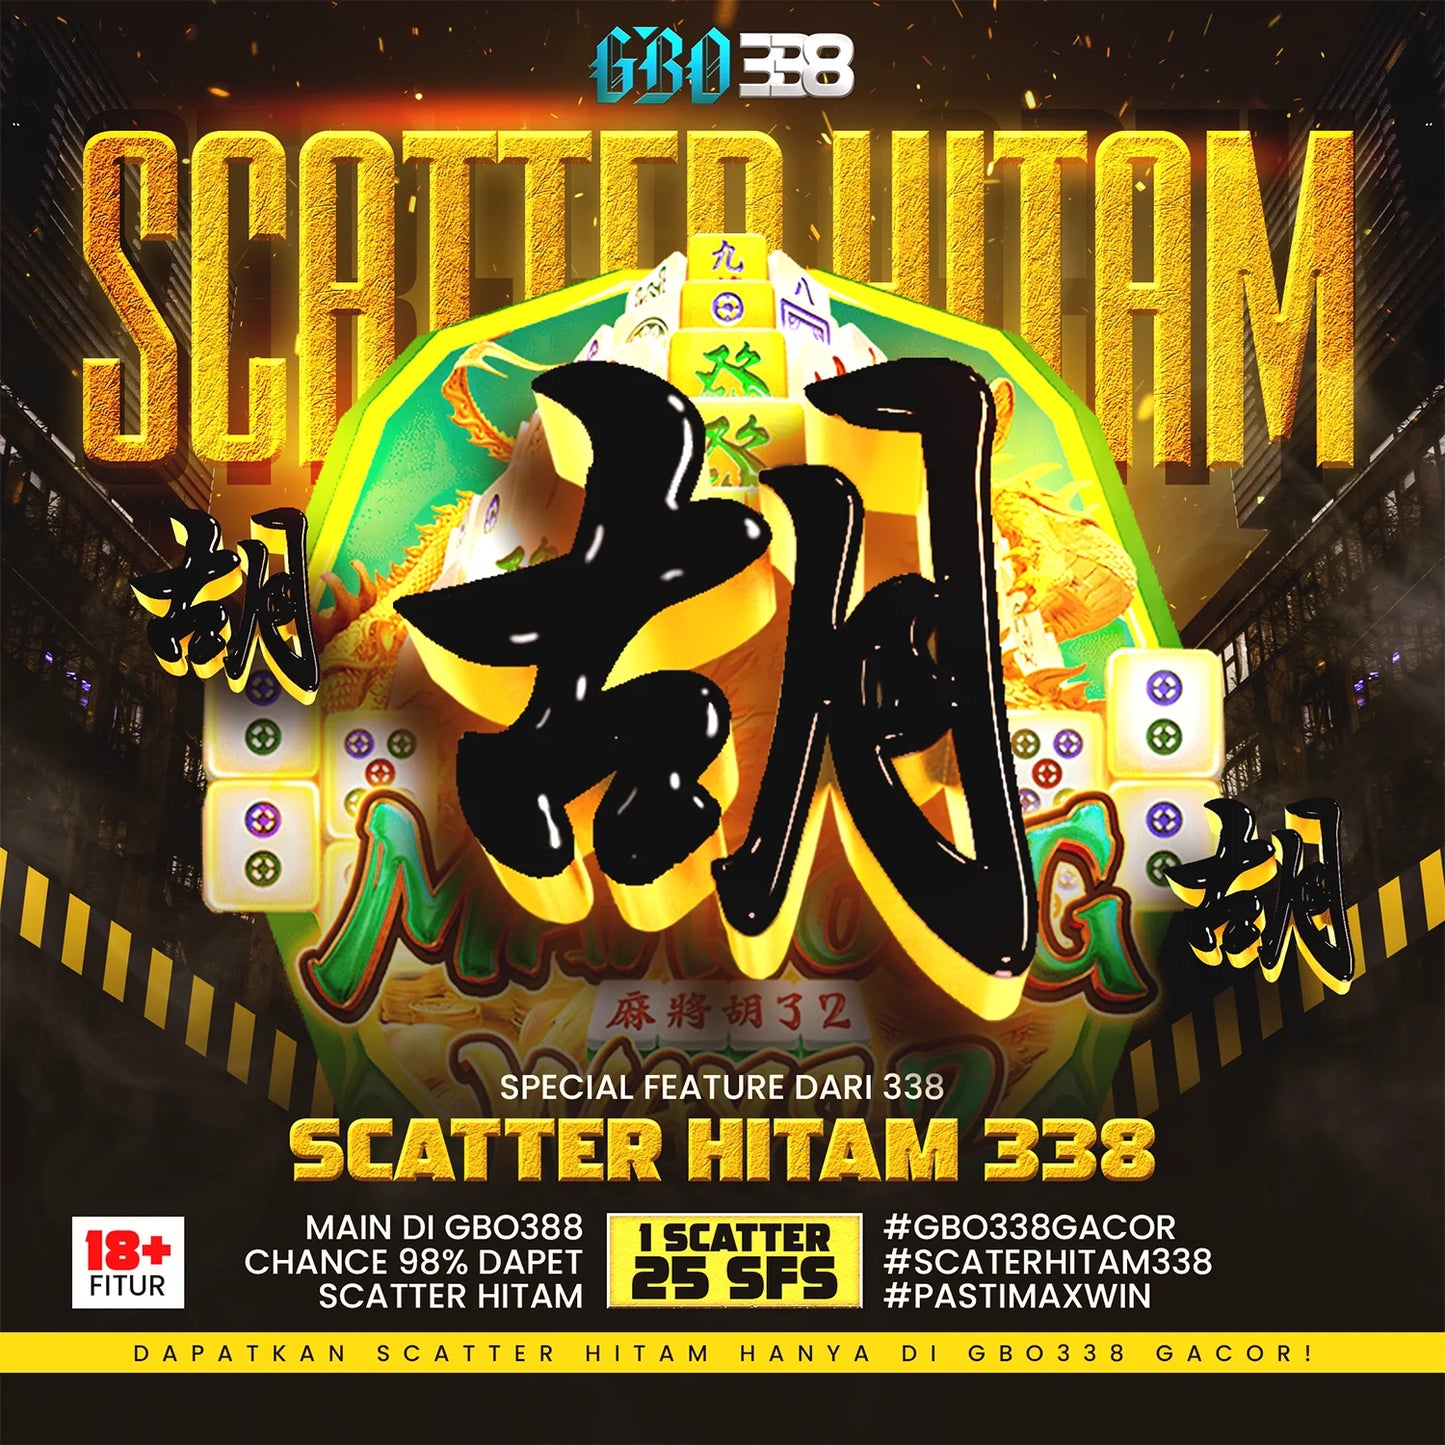 GBO338 - Situs Provider Scatter Hitam Spesialis PG Soft